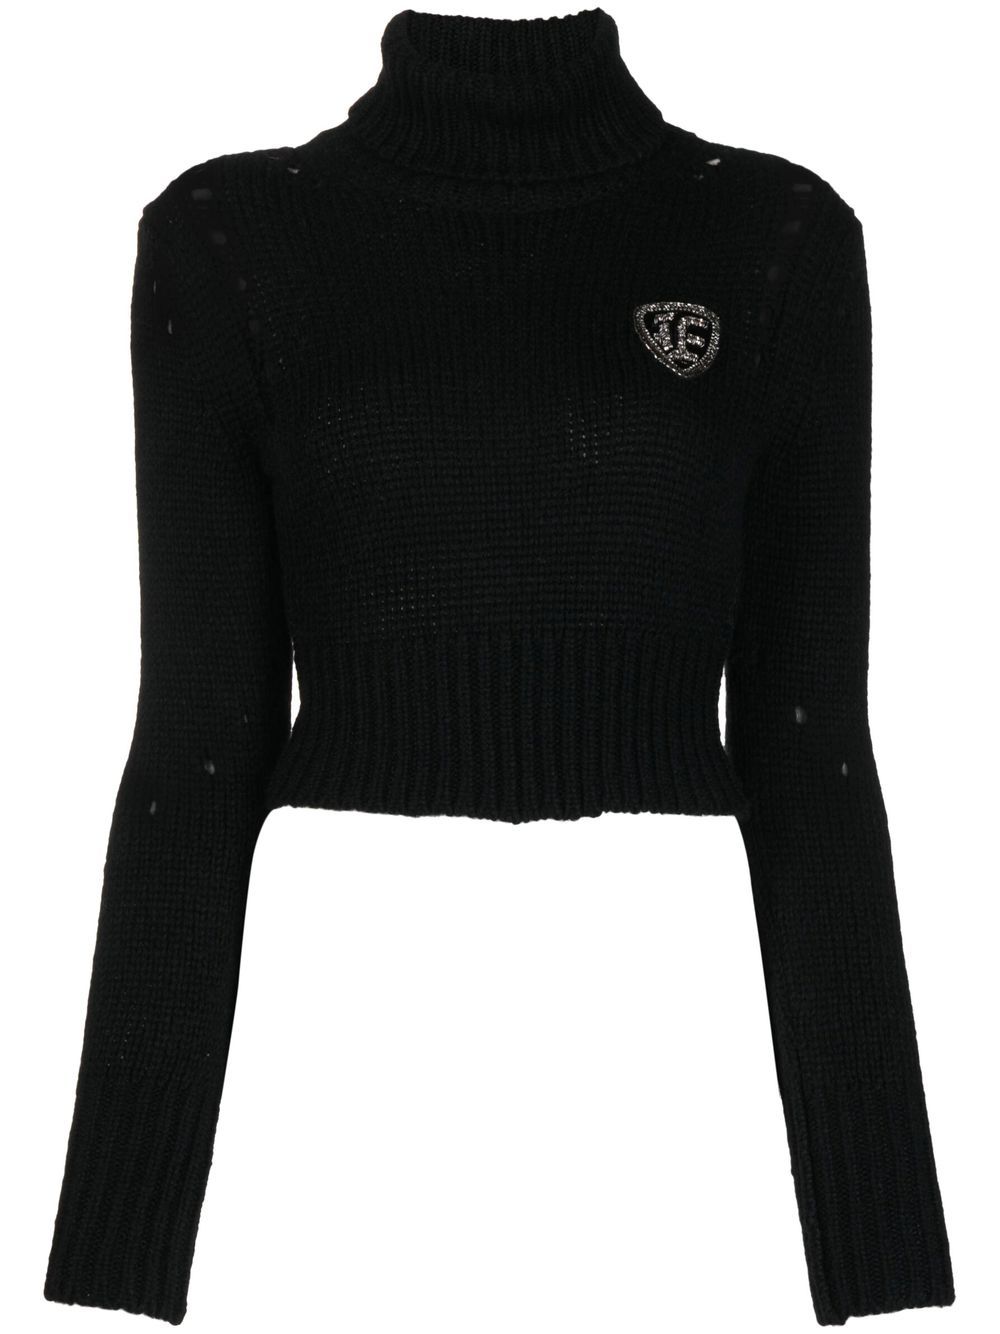 Ermanno Scervino Distressed Cropped Rollneck Sweater - Farfetch